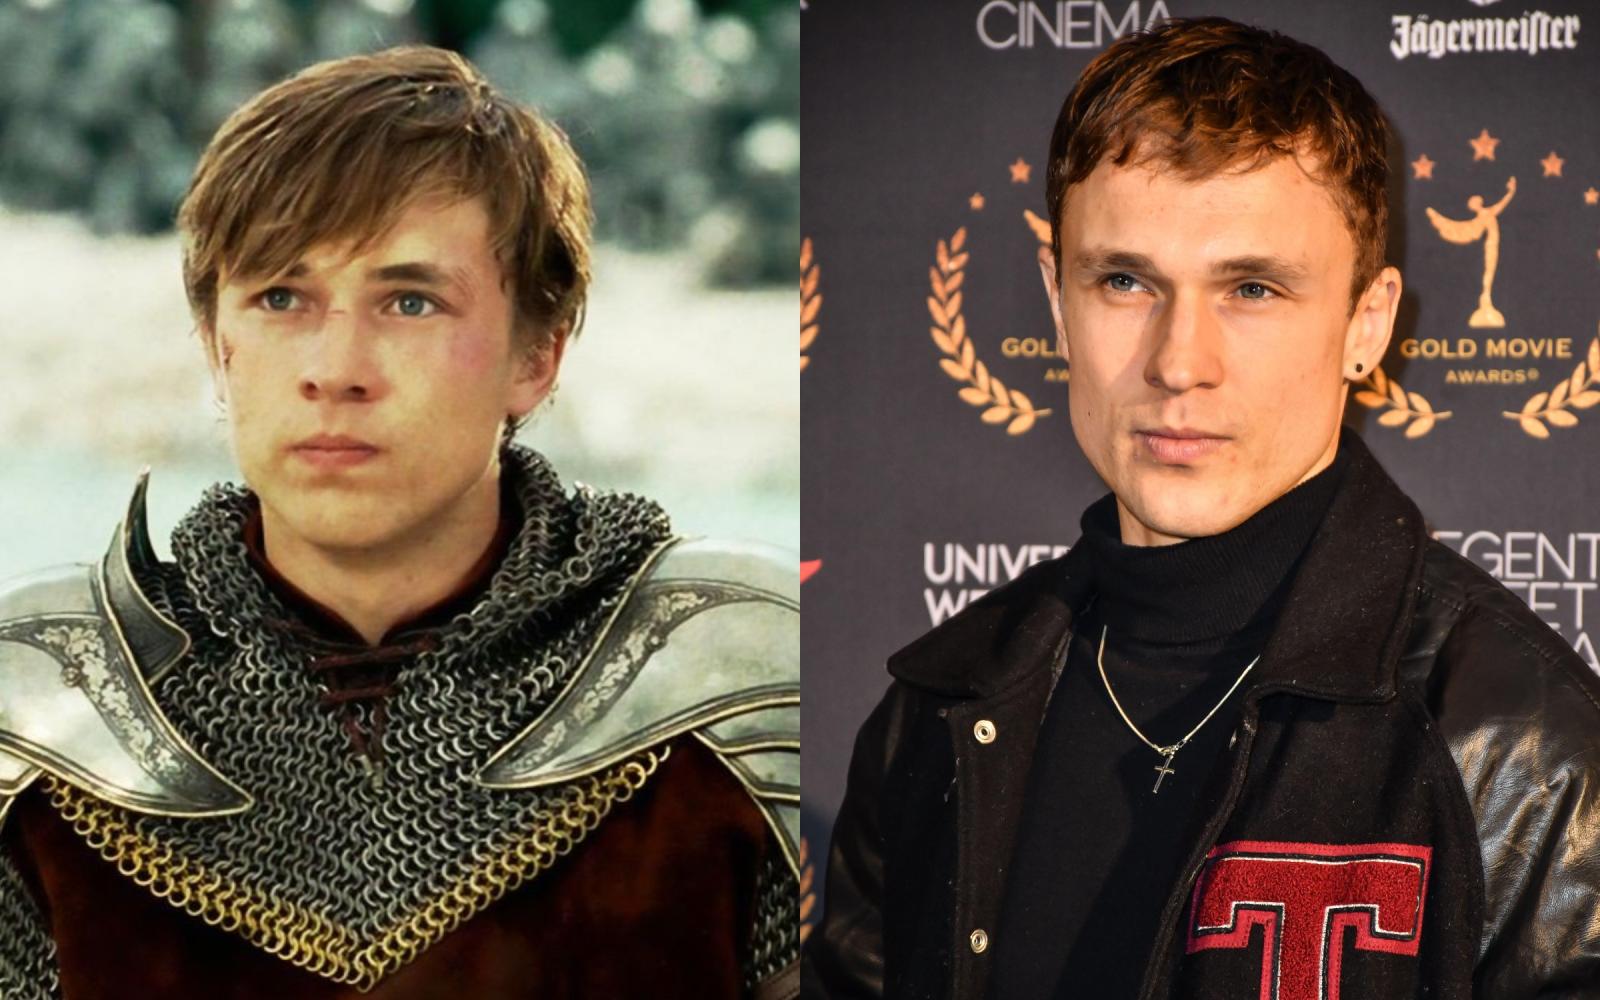 Here's What The Chronicles of Narnia Stars Look Like Now - image 2